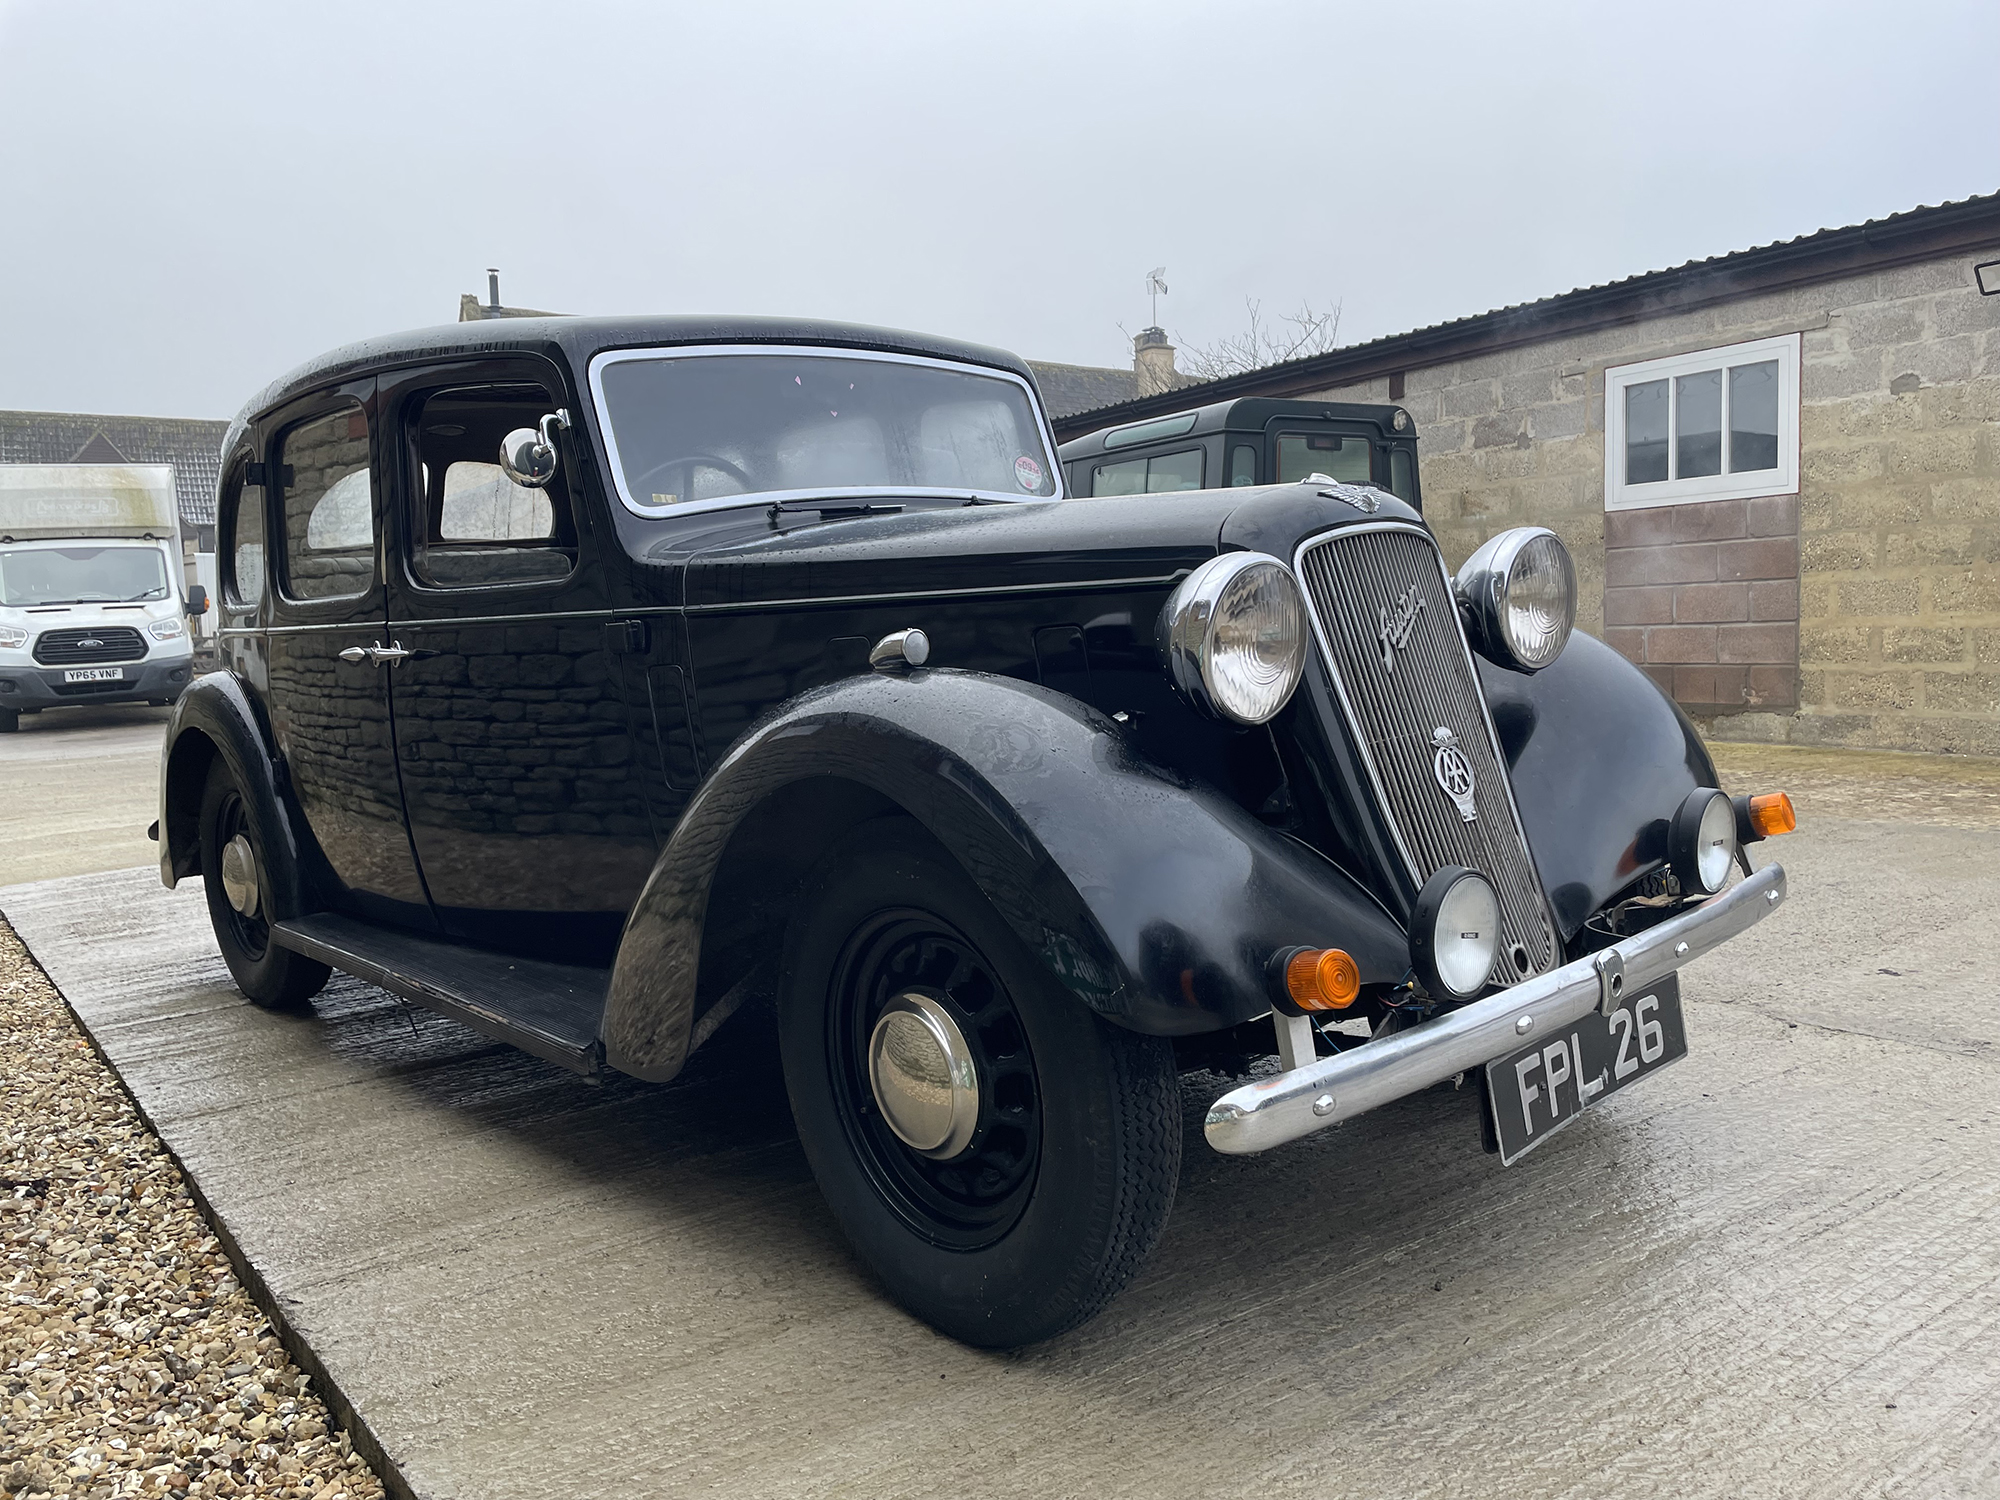 1937 Austin 12/4 Saloon Reg. no. FPL 26 Chassis no. H52240 Engine no. 1H 52950 - Image 3 of 9